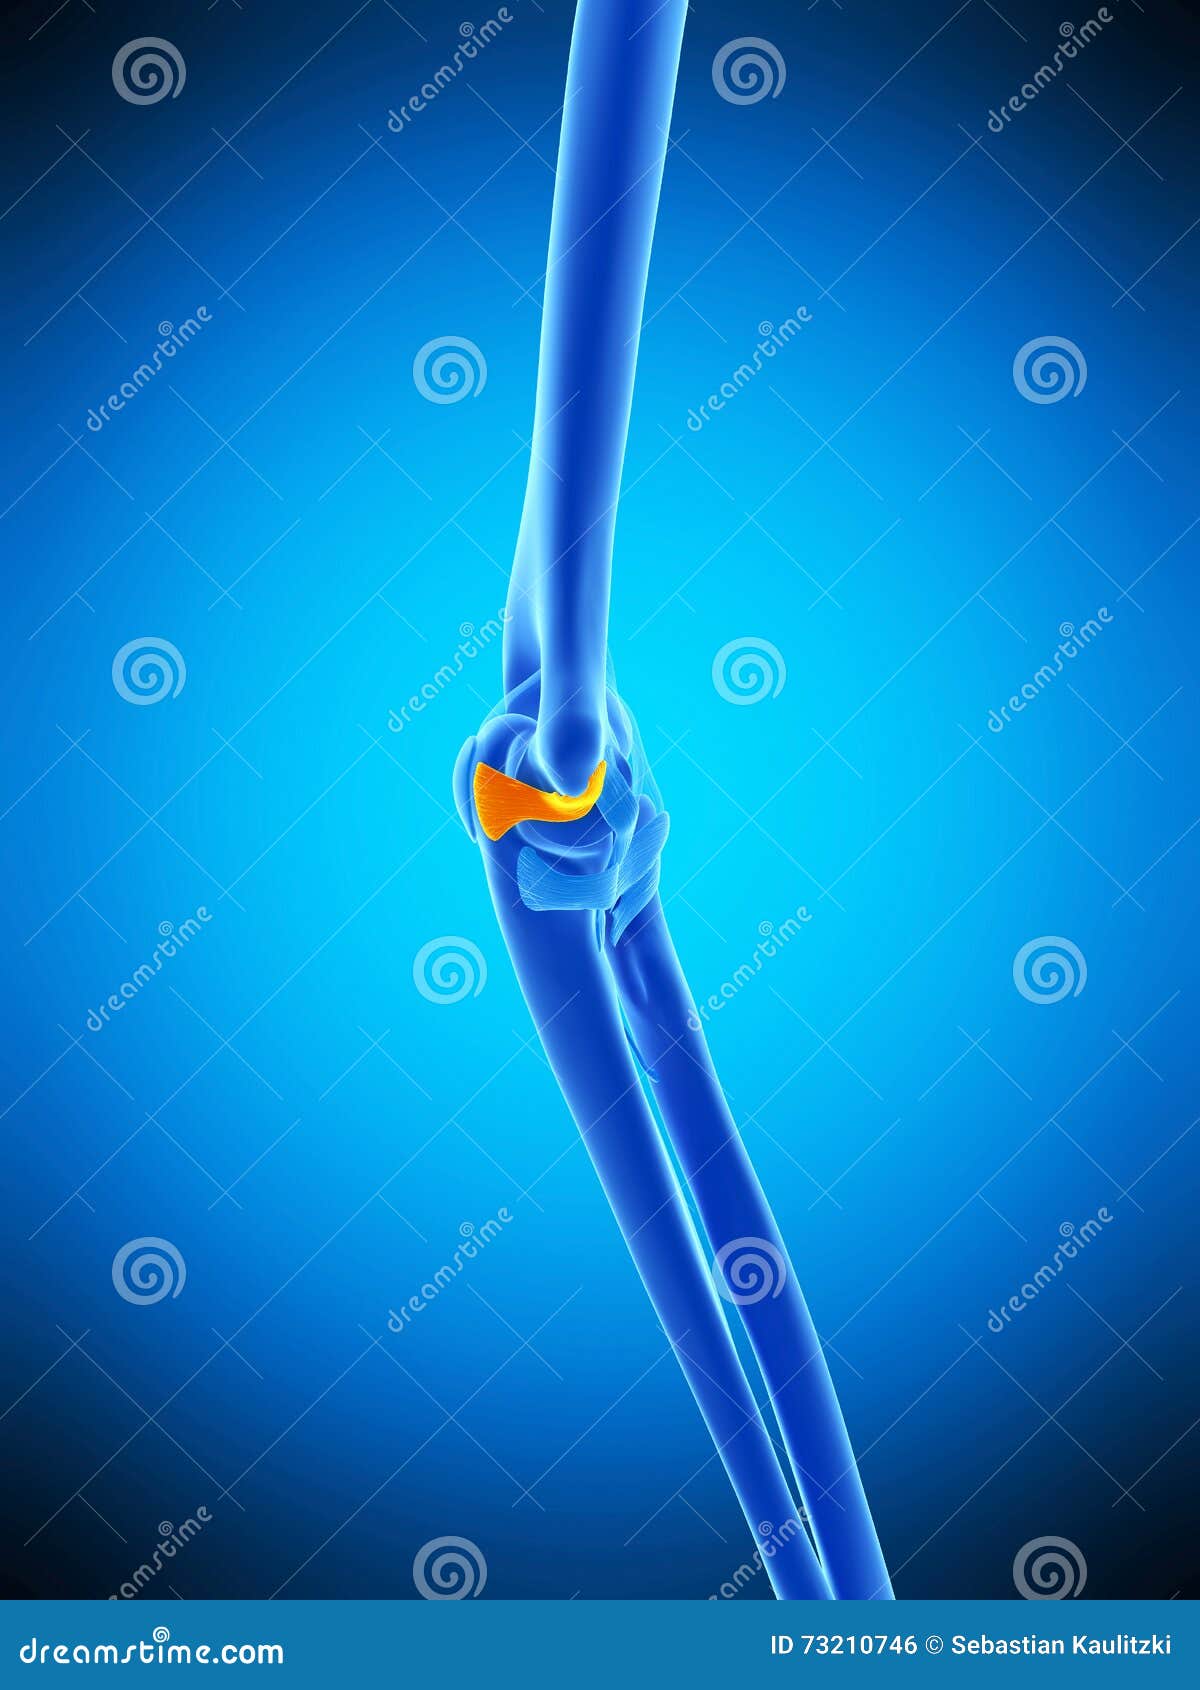 the ulnar collateral ligament